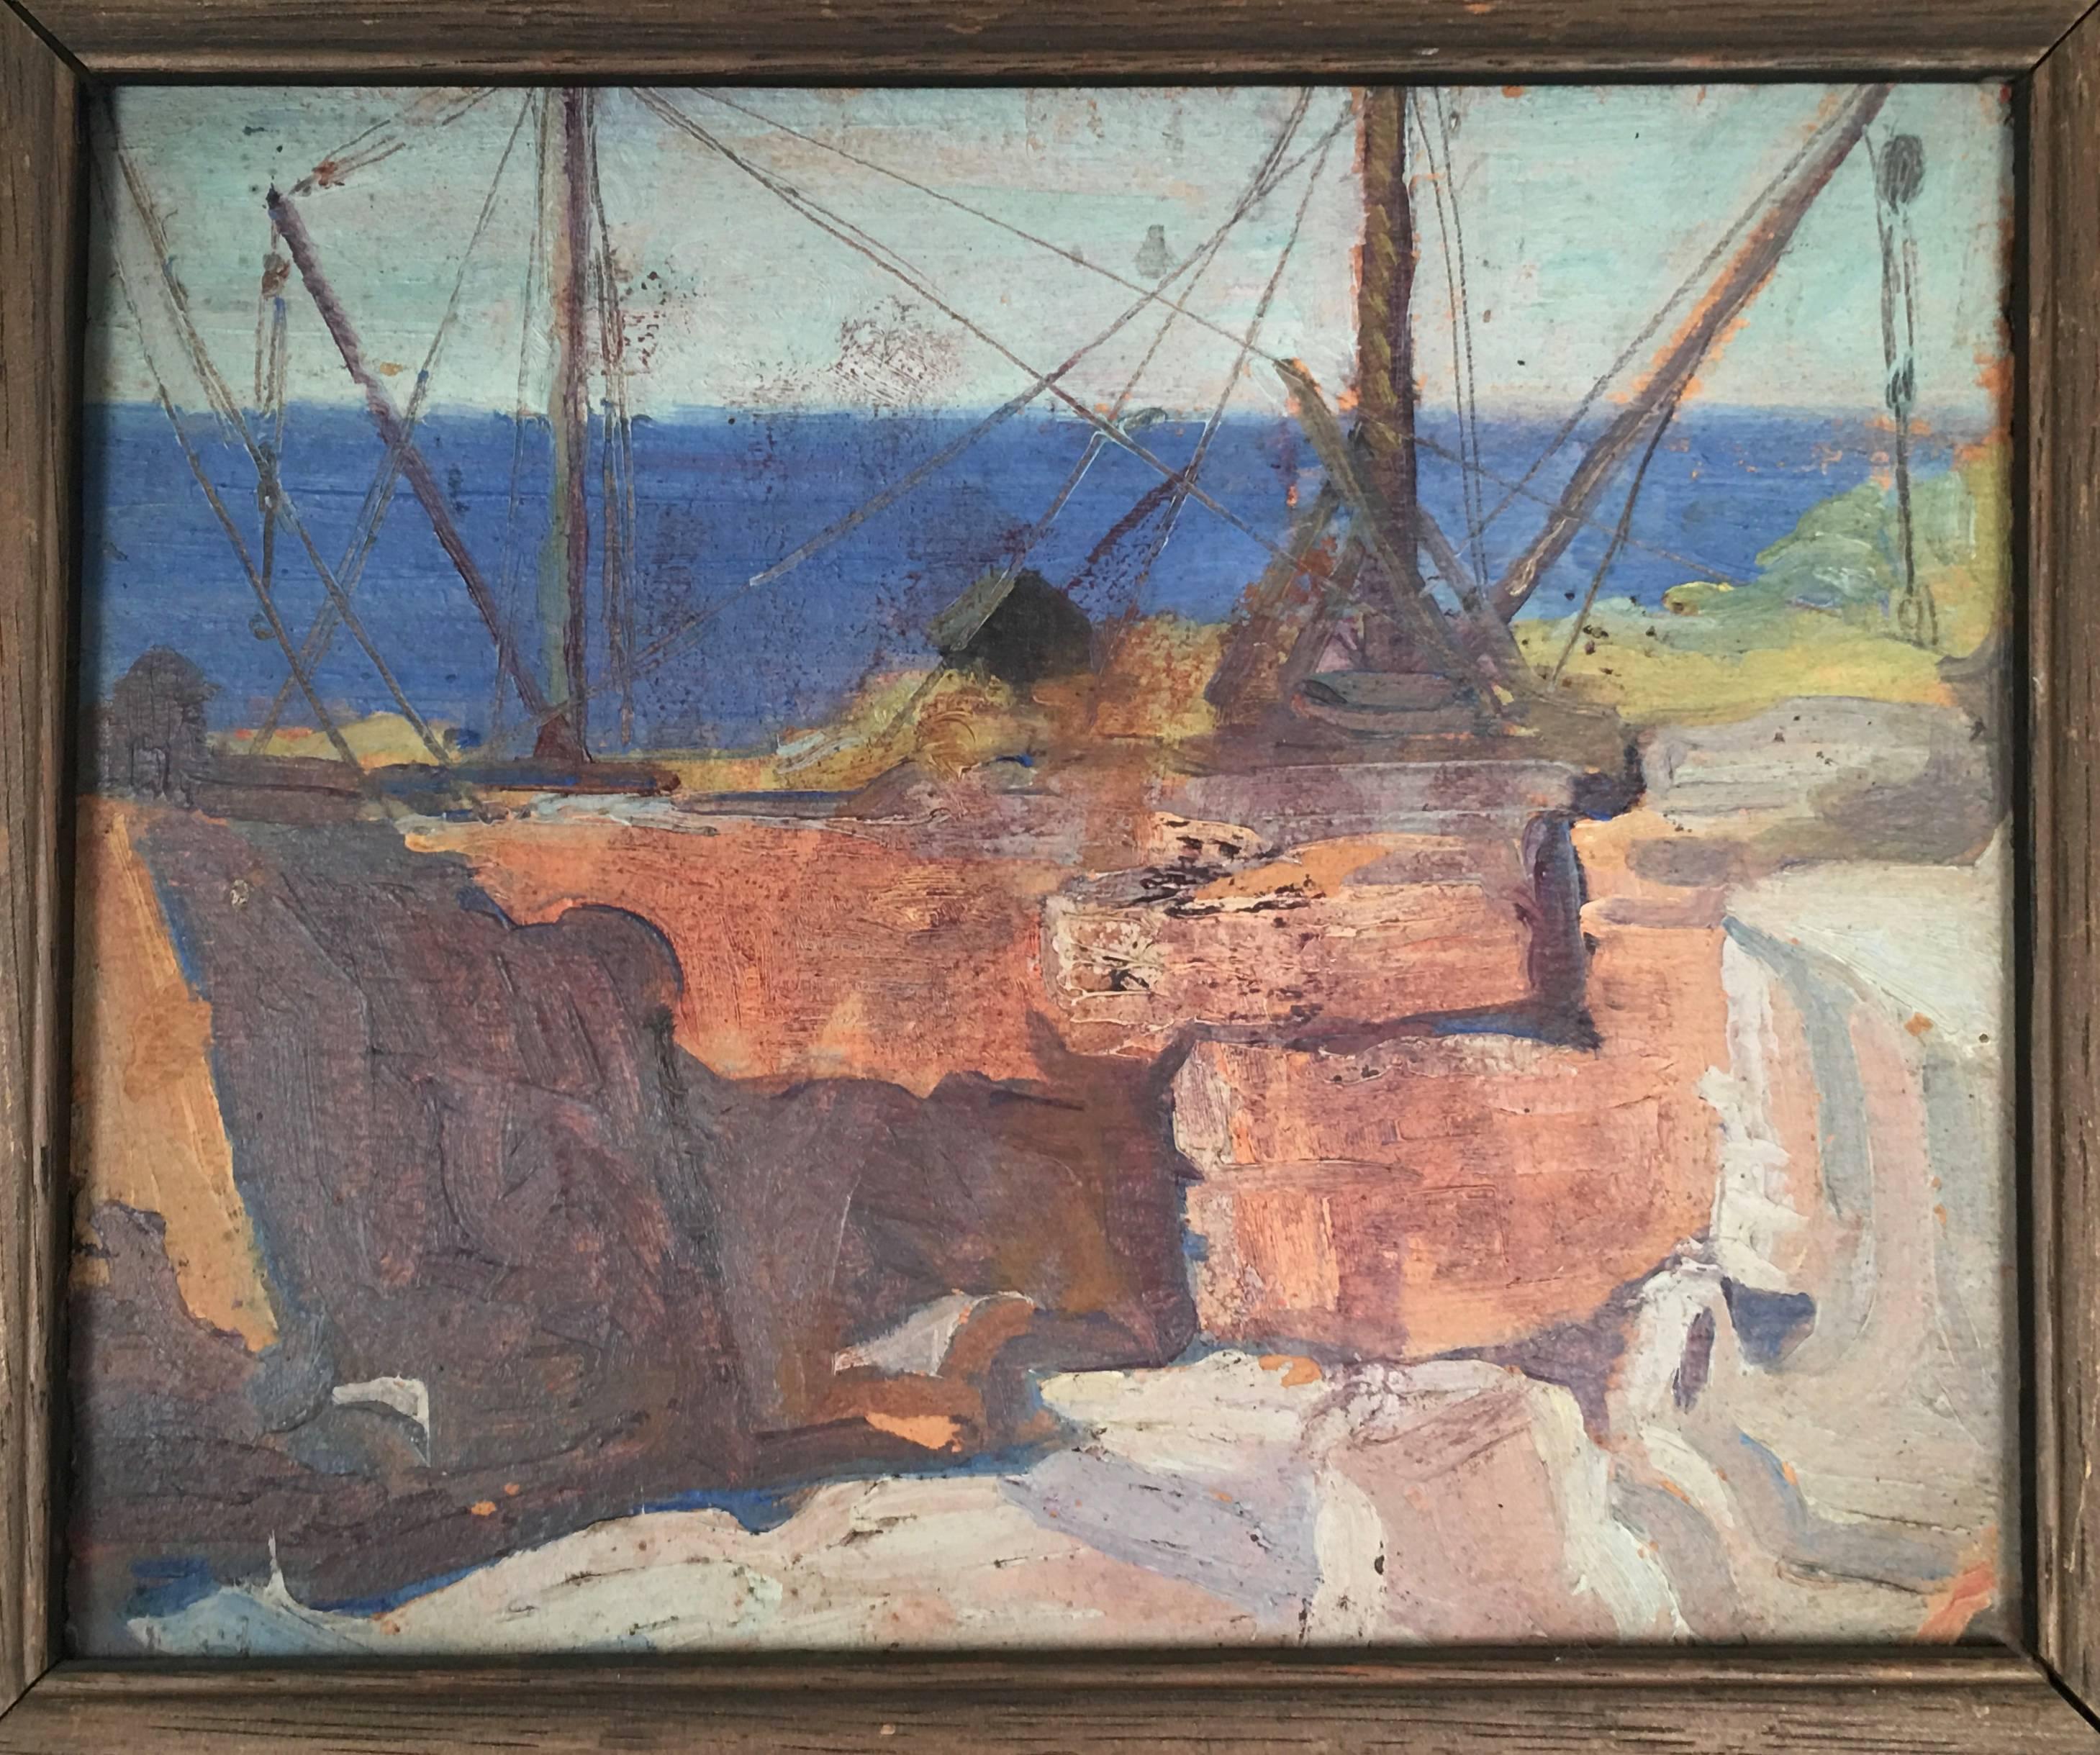 An oil on board painting of a coastal rock quarry, likely in Gloucester or Rockport, Cape Ann, Massachusetts, in original worn gilded oak frame. A well observed rendering of an unusual subject. Unsigned.